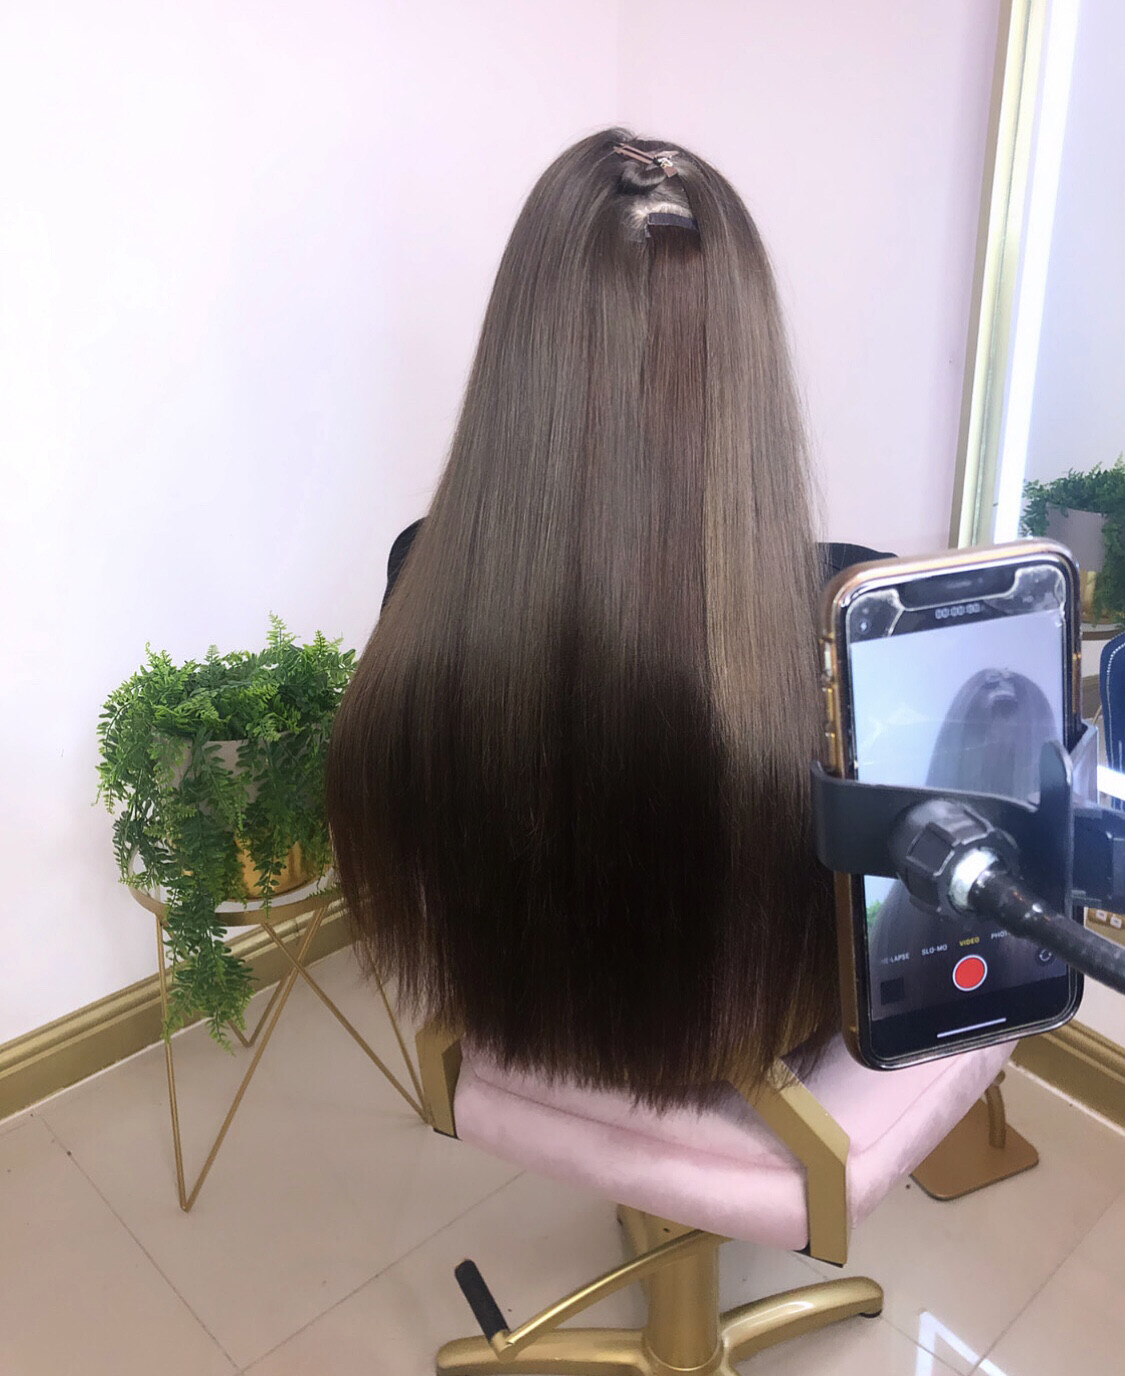 Tape Hair Extensions Training Course. Online